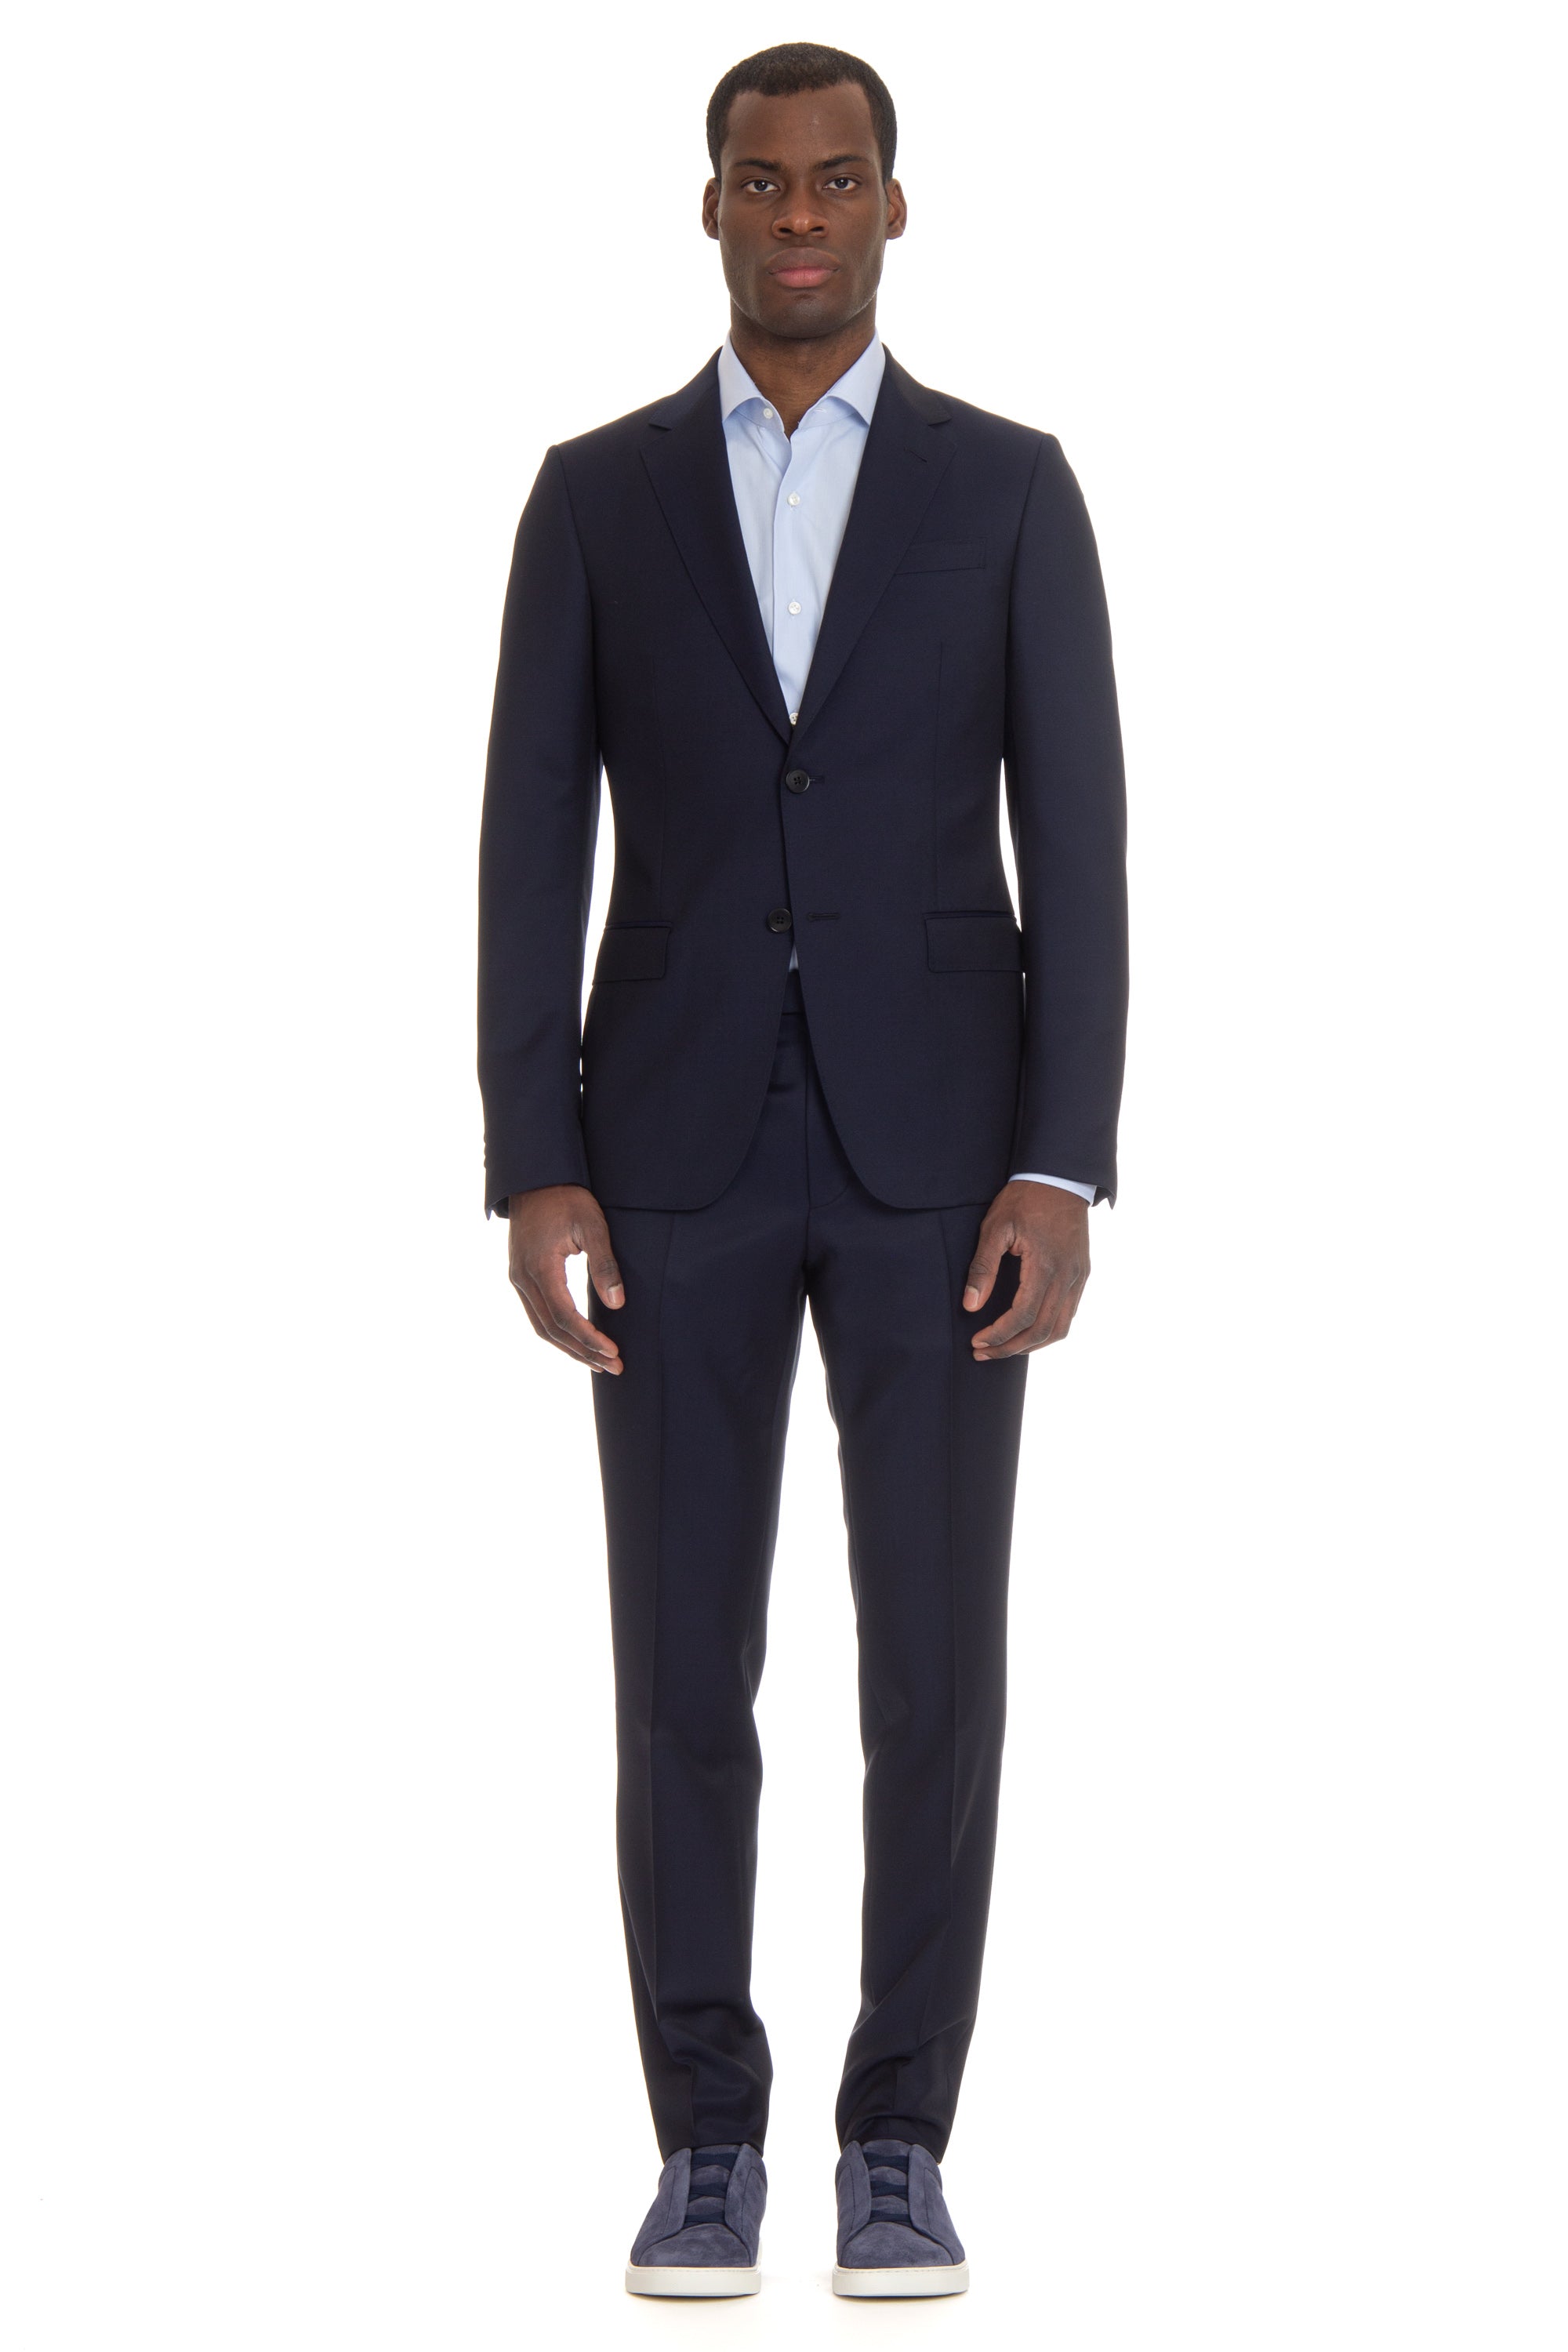 Two-button suit in wool-mohair, drop 8